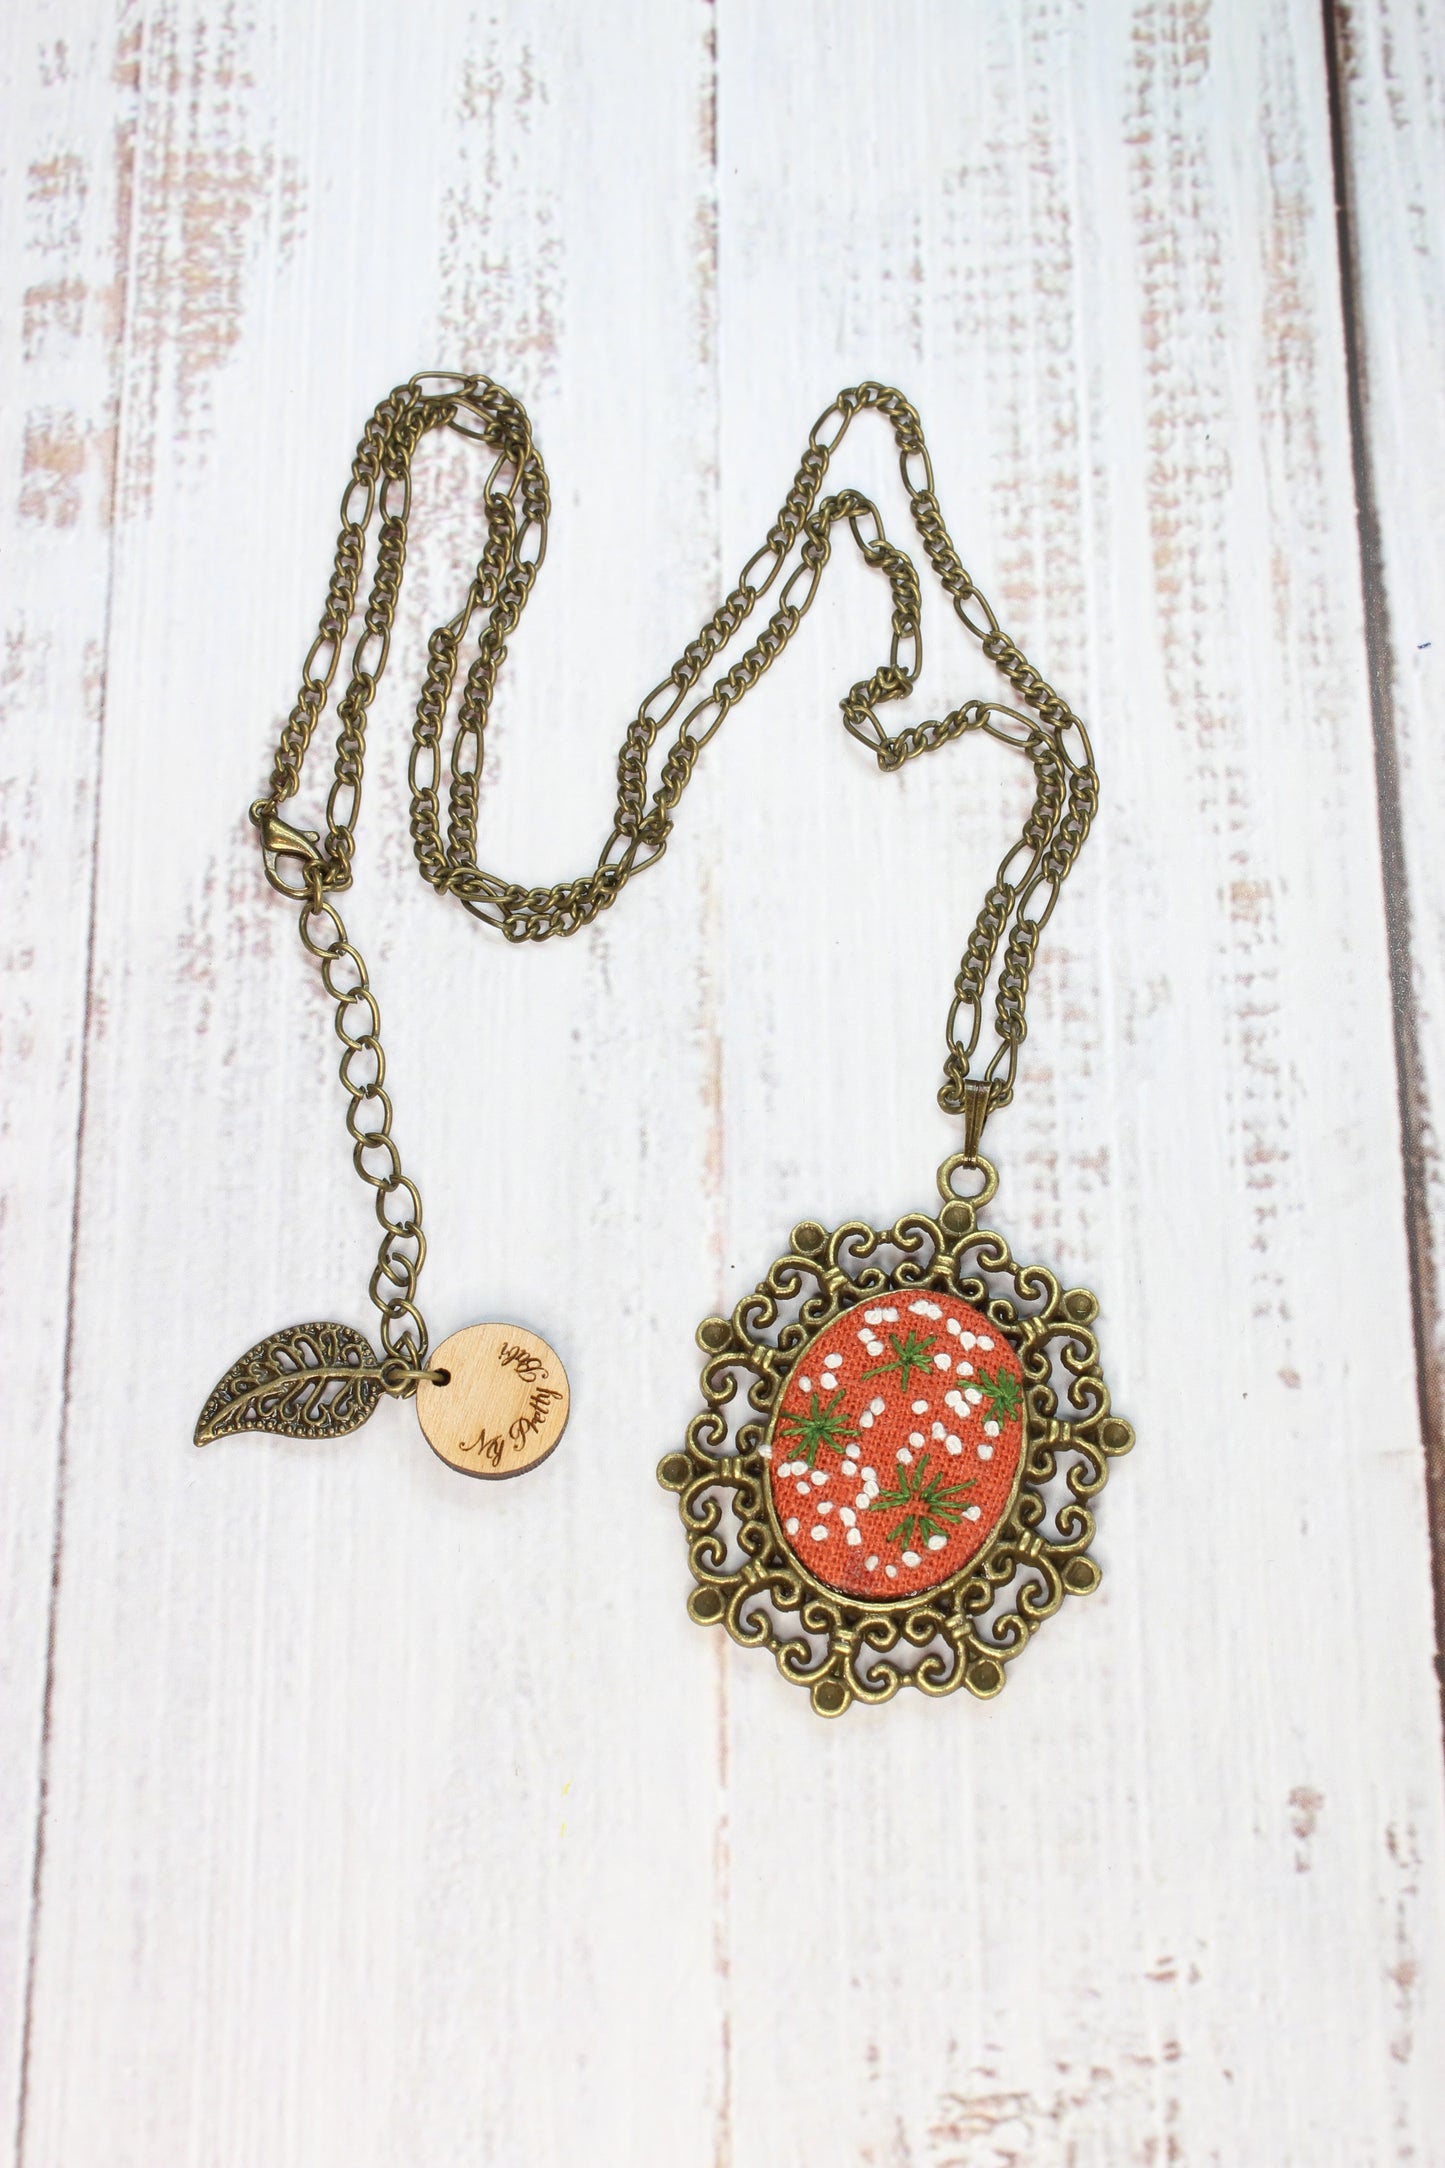 Embroidery Dandelion Necklace